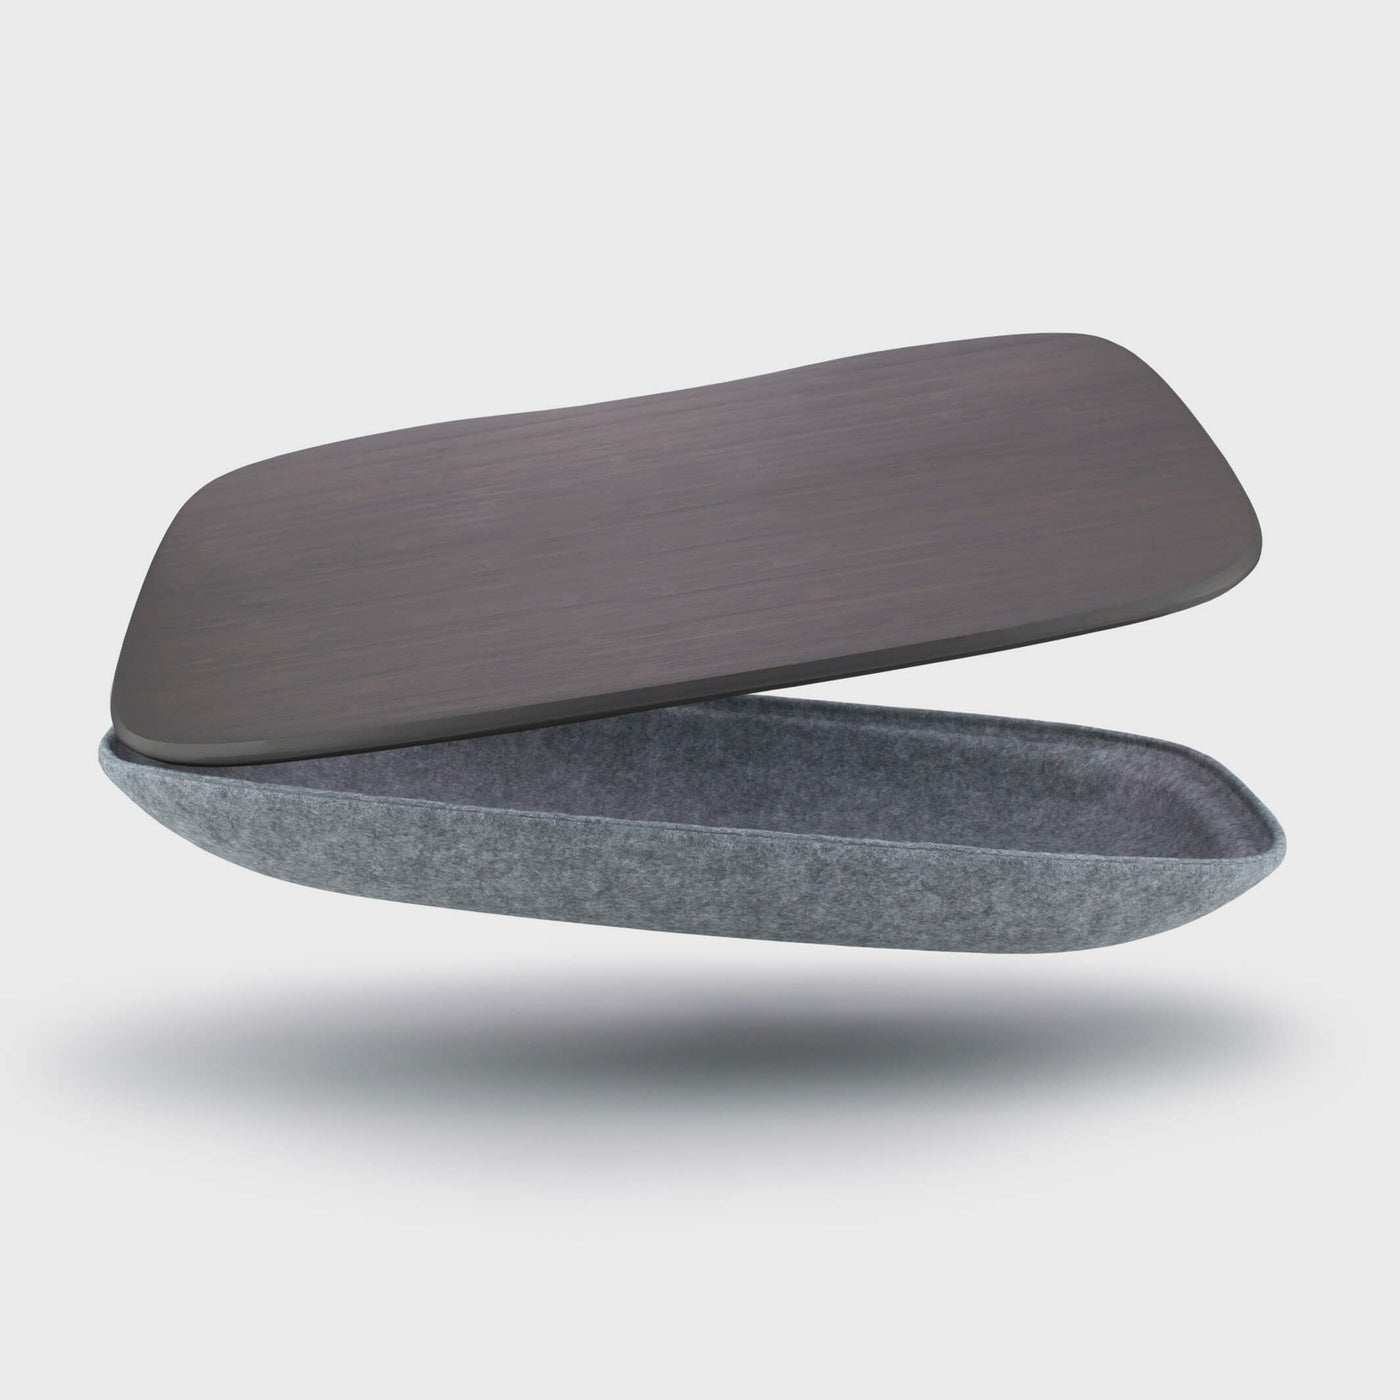 Lapod lap desk with storage limited edition with colour lap tray, floating and open. Felt, bamboo: Graphite / Ash grey